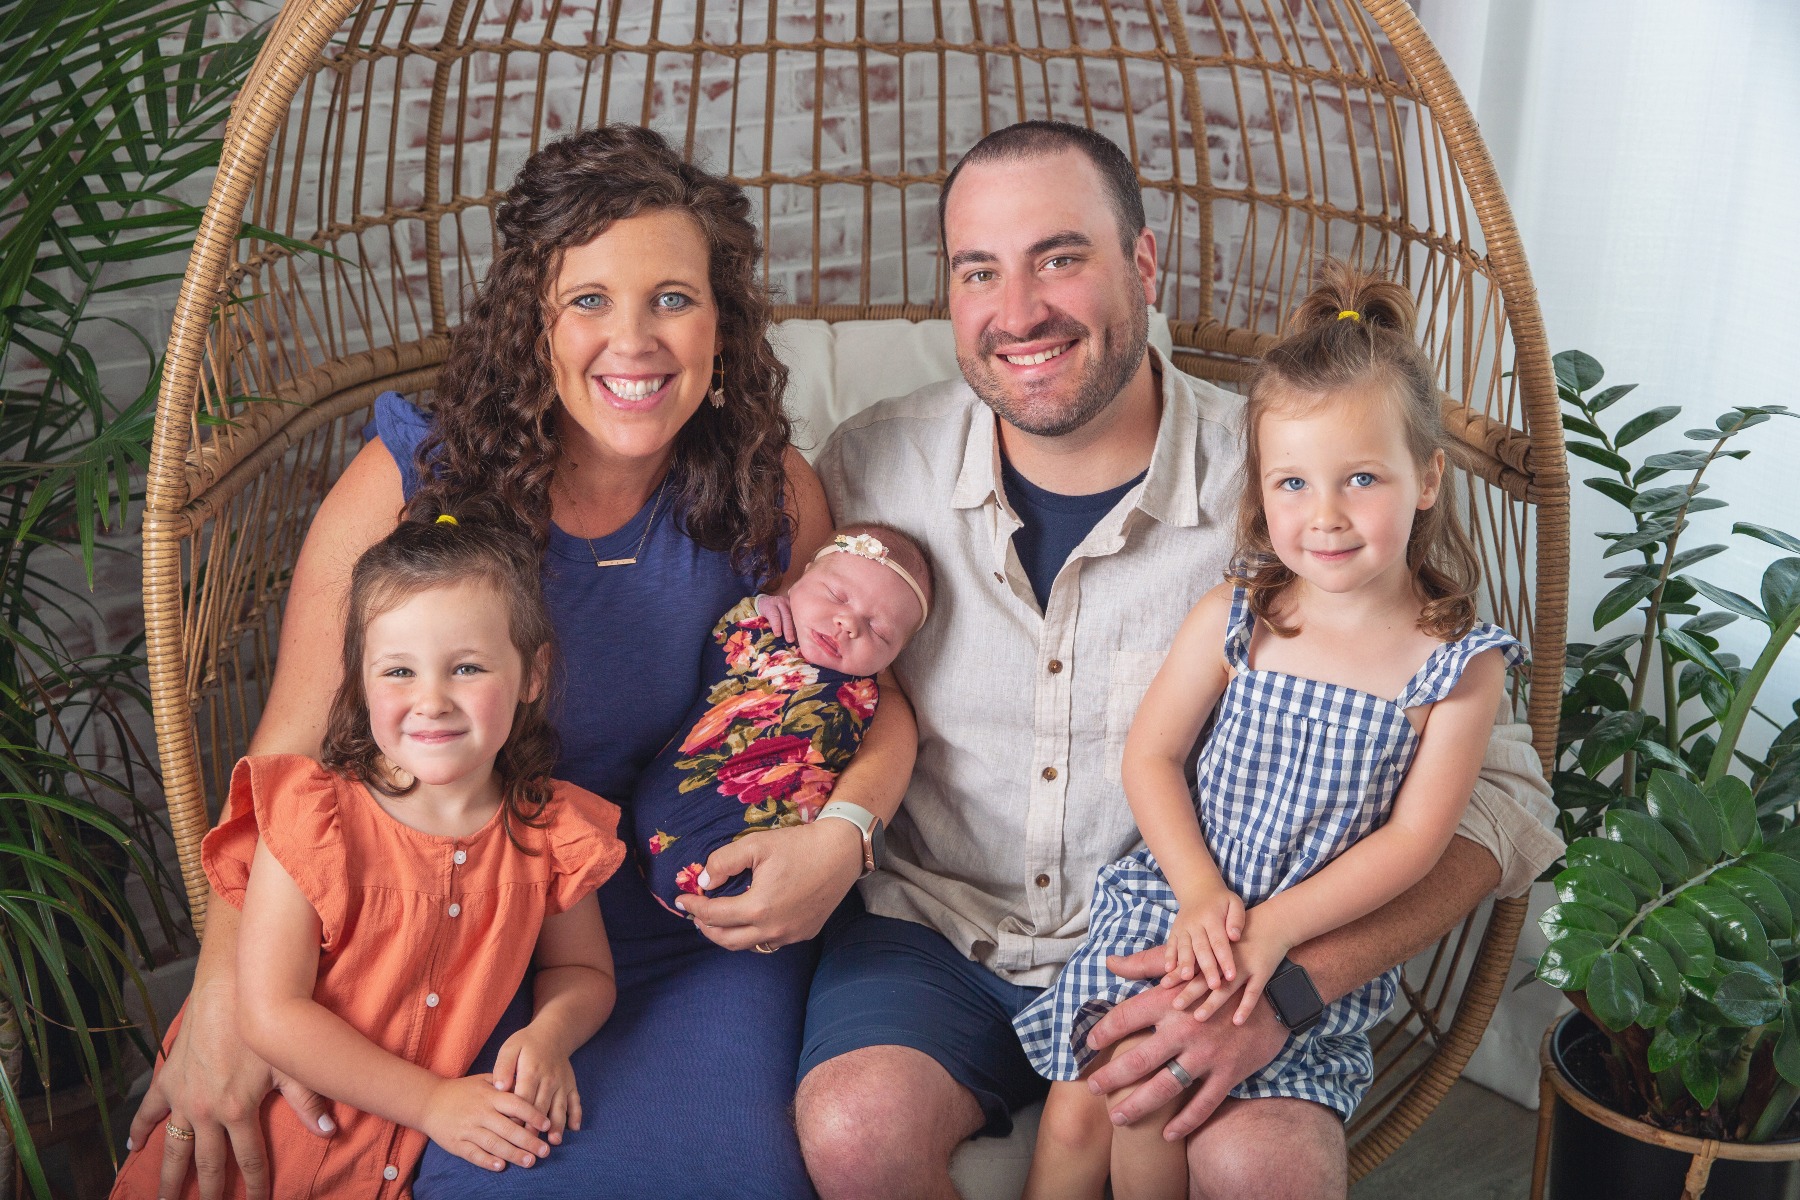 family of 5 poses with their newborn baby